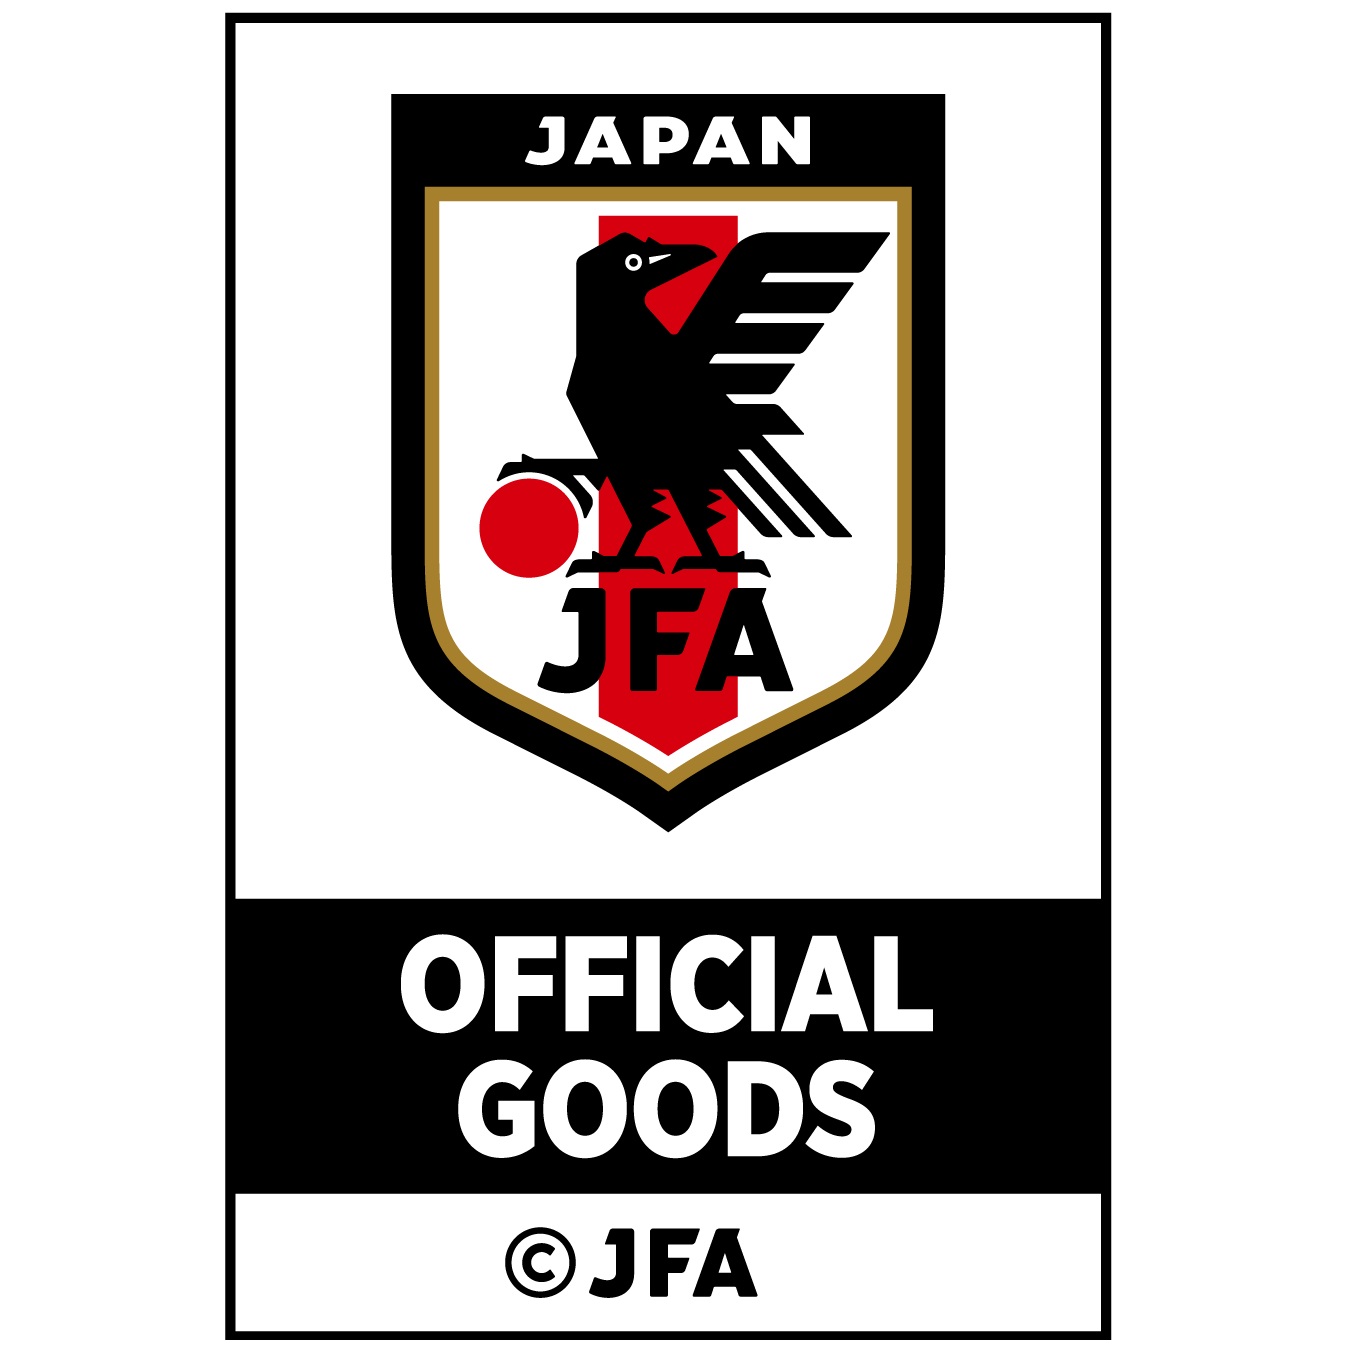 JFA OFFICIAL GOODS サッカーベア おもちゃ ぬいぐるみ le-routeur 